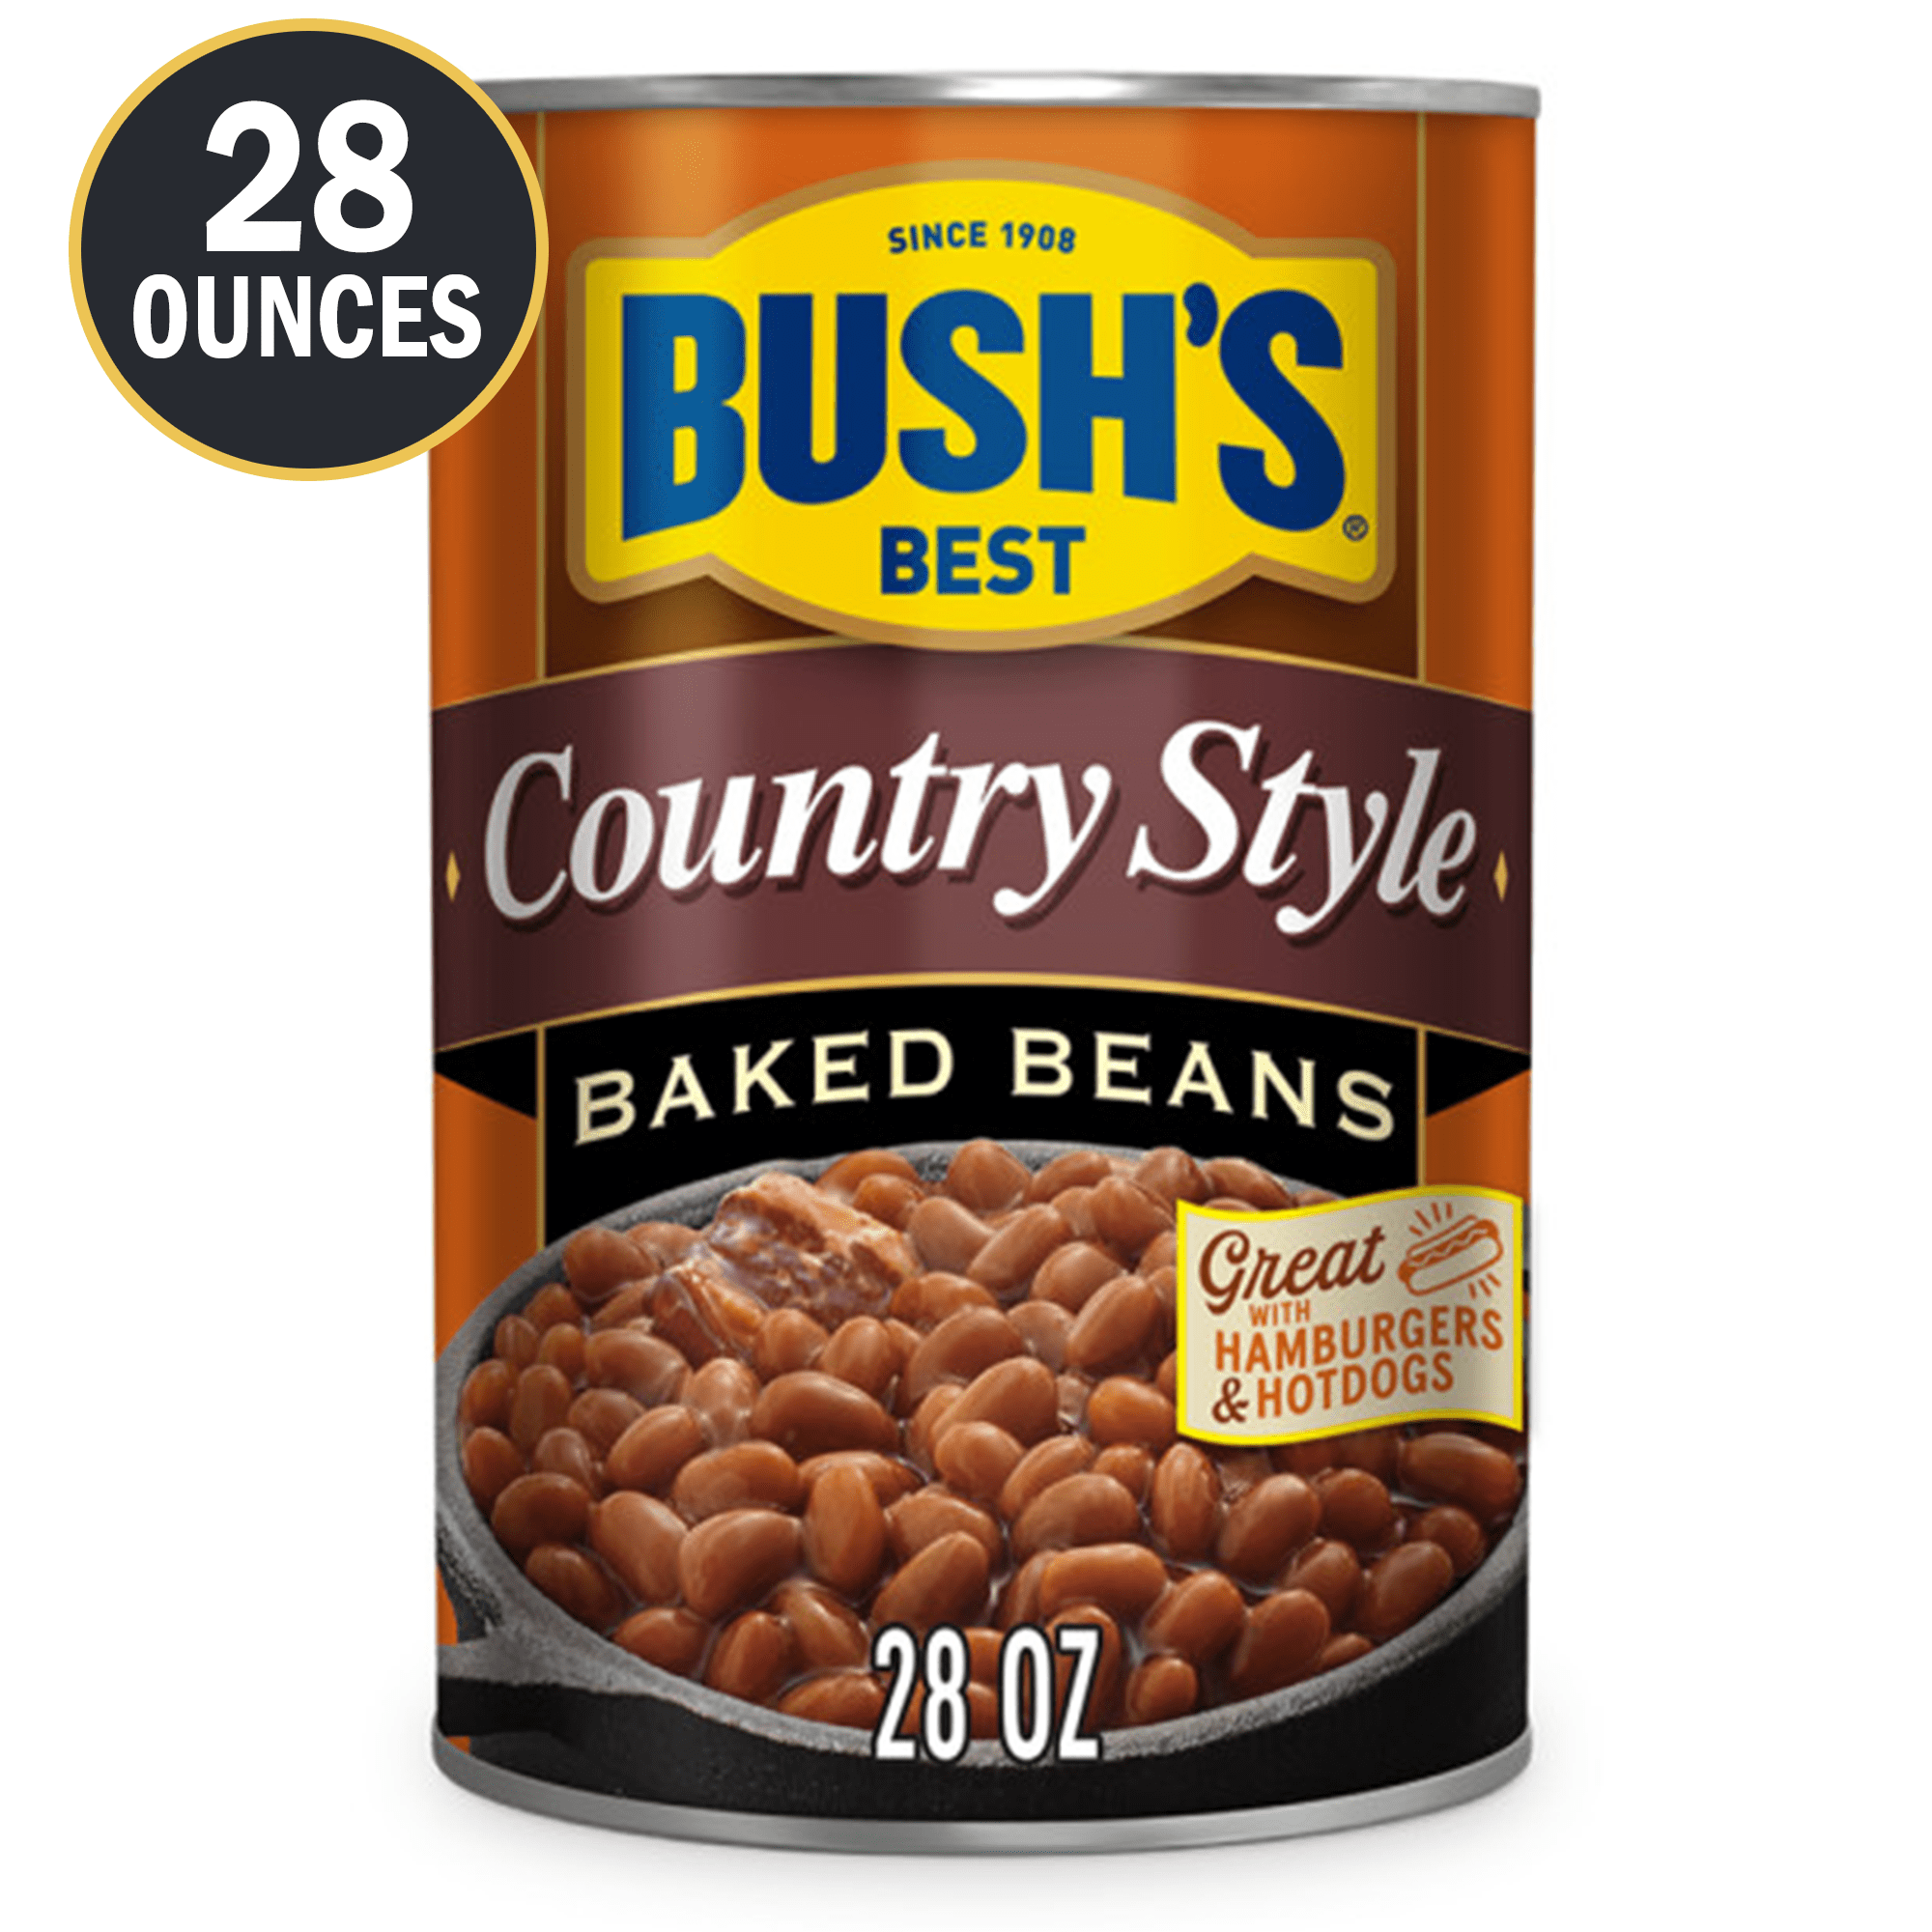 Bush's Country Style Baked Beans, Canned Beans, 28 oz